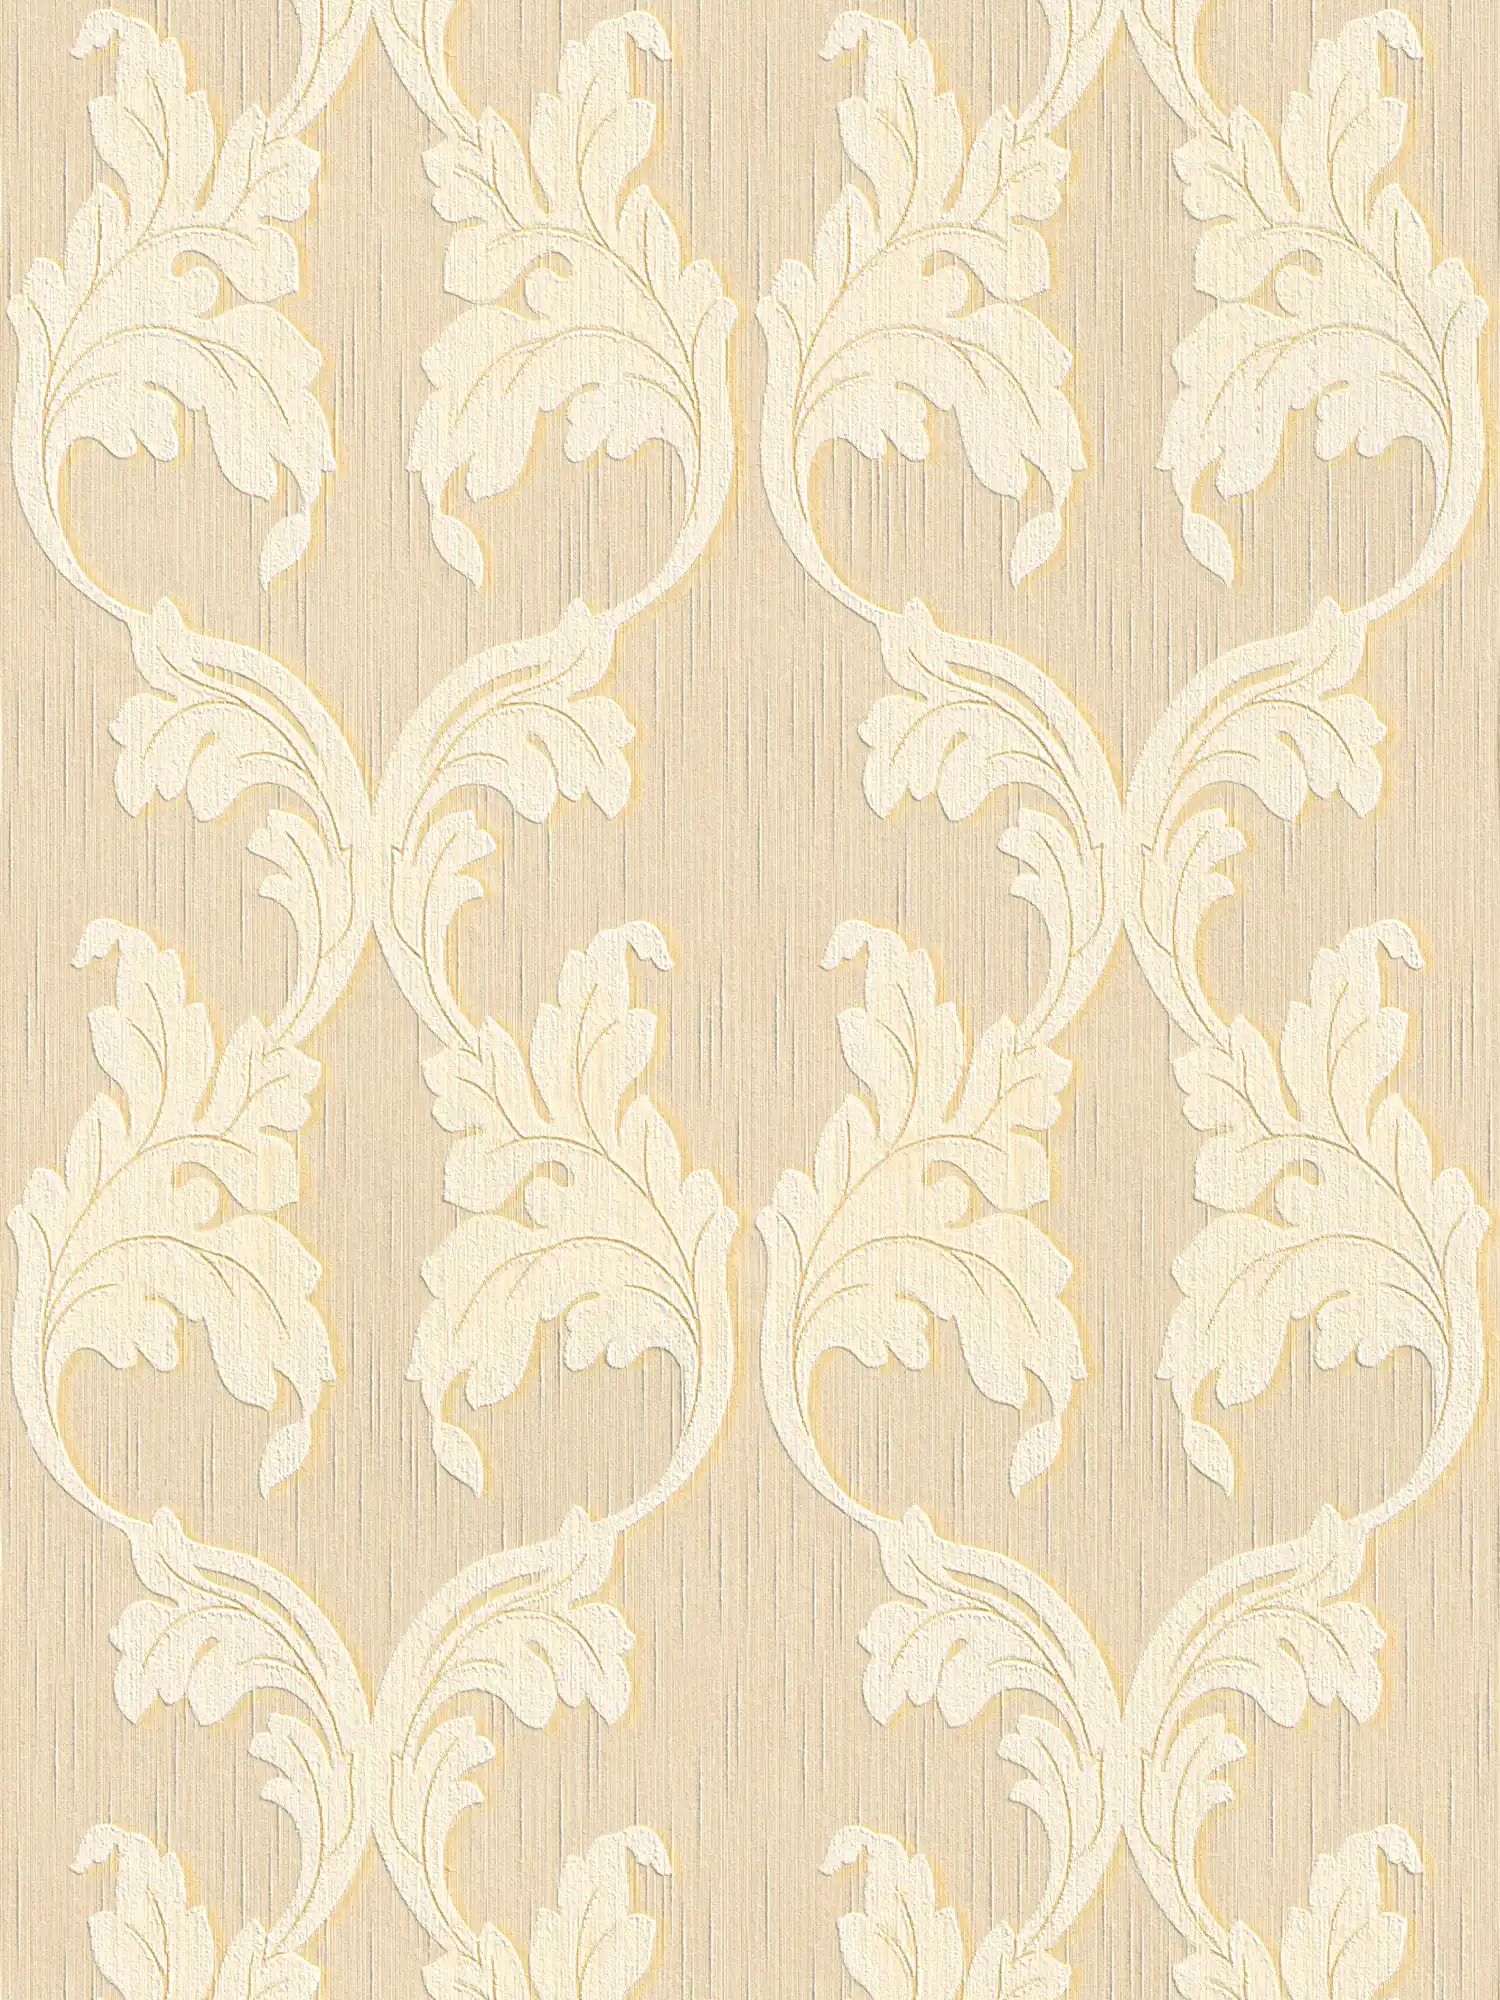 Textile wallpaper with baroque tendrils - beige, yellow
